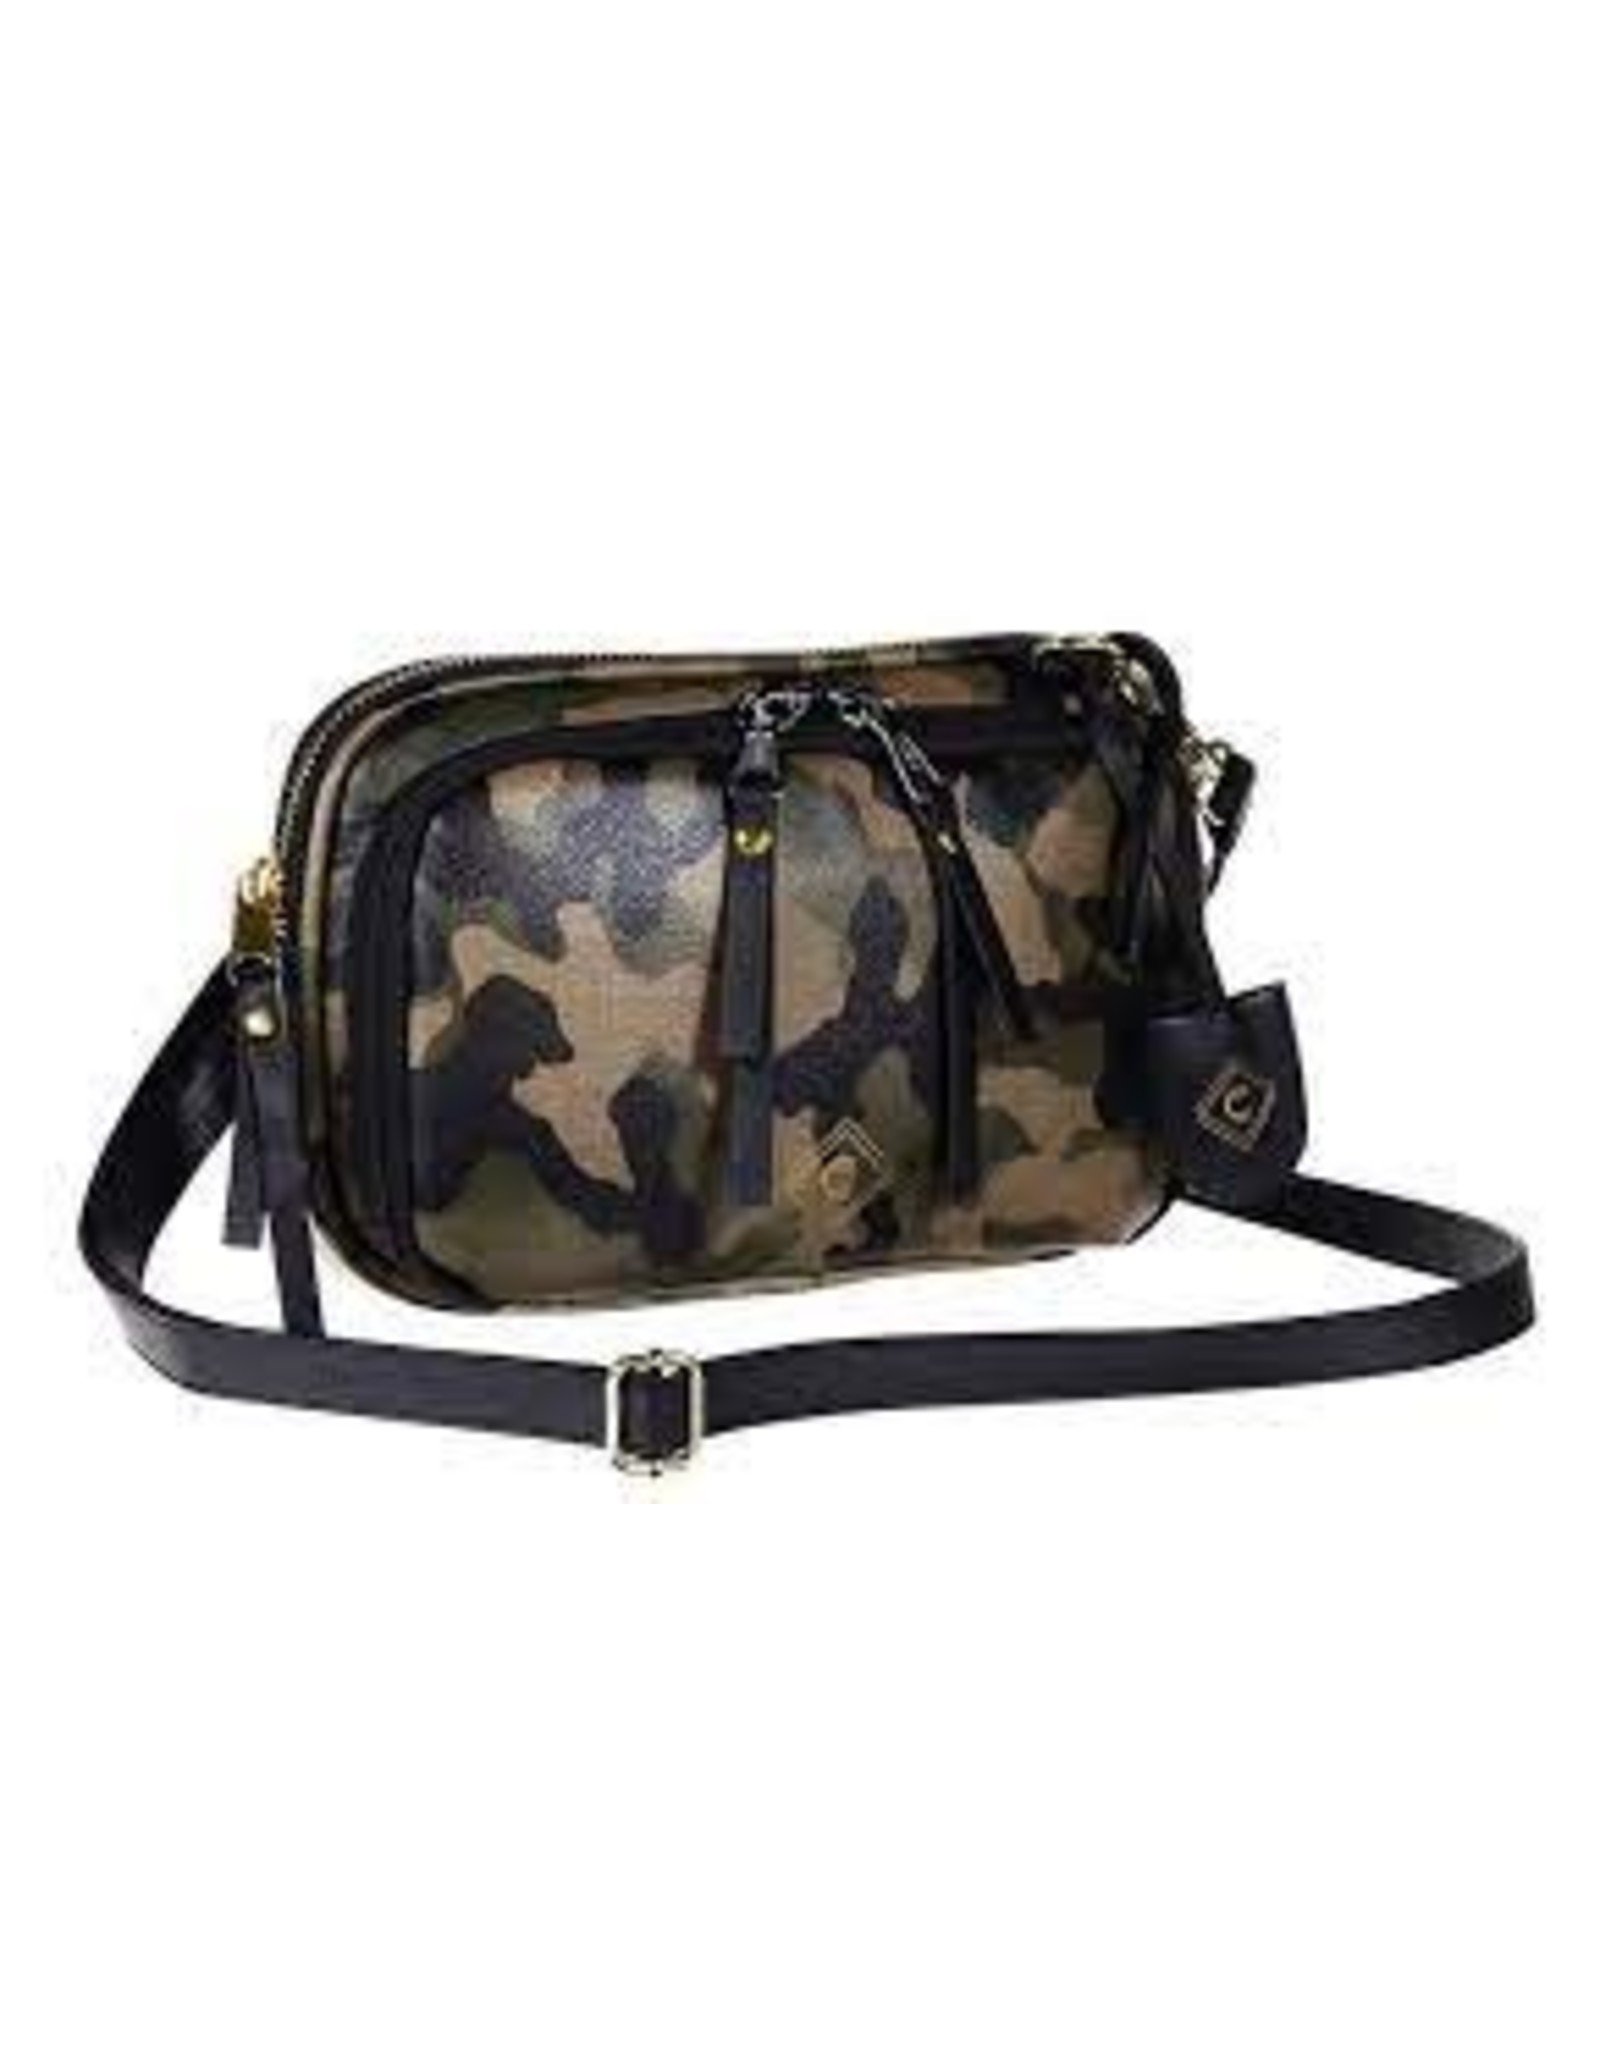 Allen - Girls with Guns Tomboy Concealed Carry Clutch